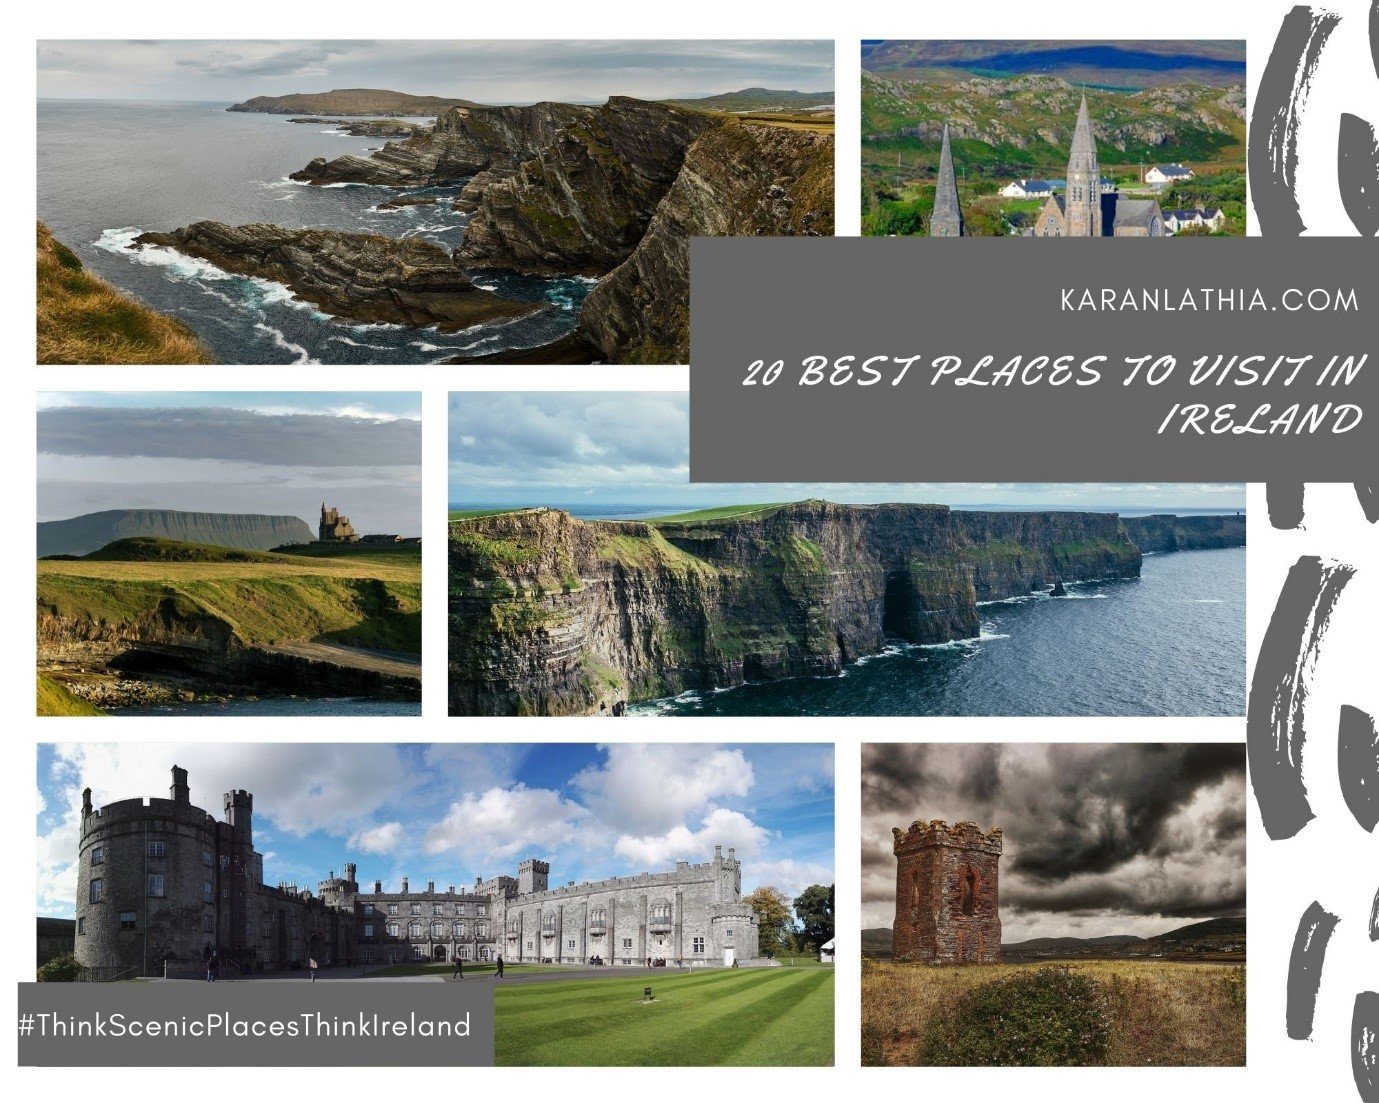 20 Beautiful Places To Visit In Ireland – Ireland Travel Guide